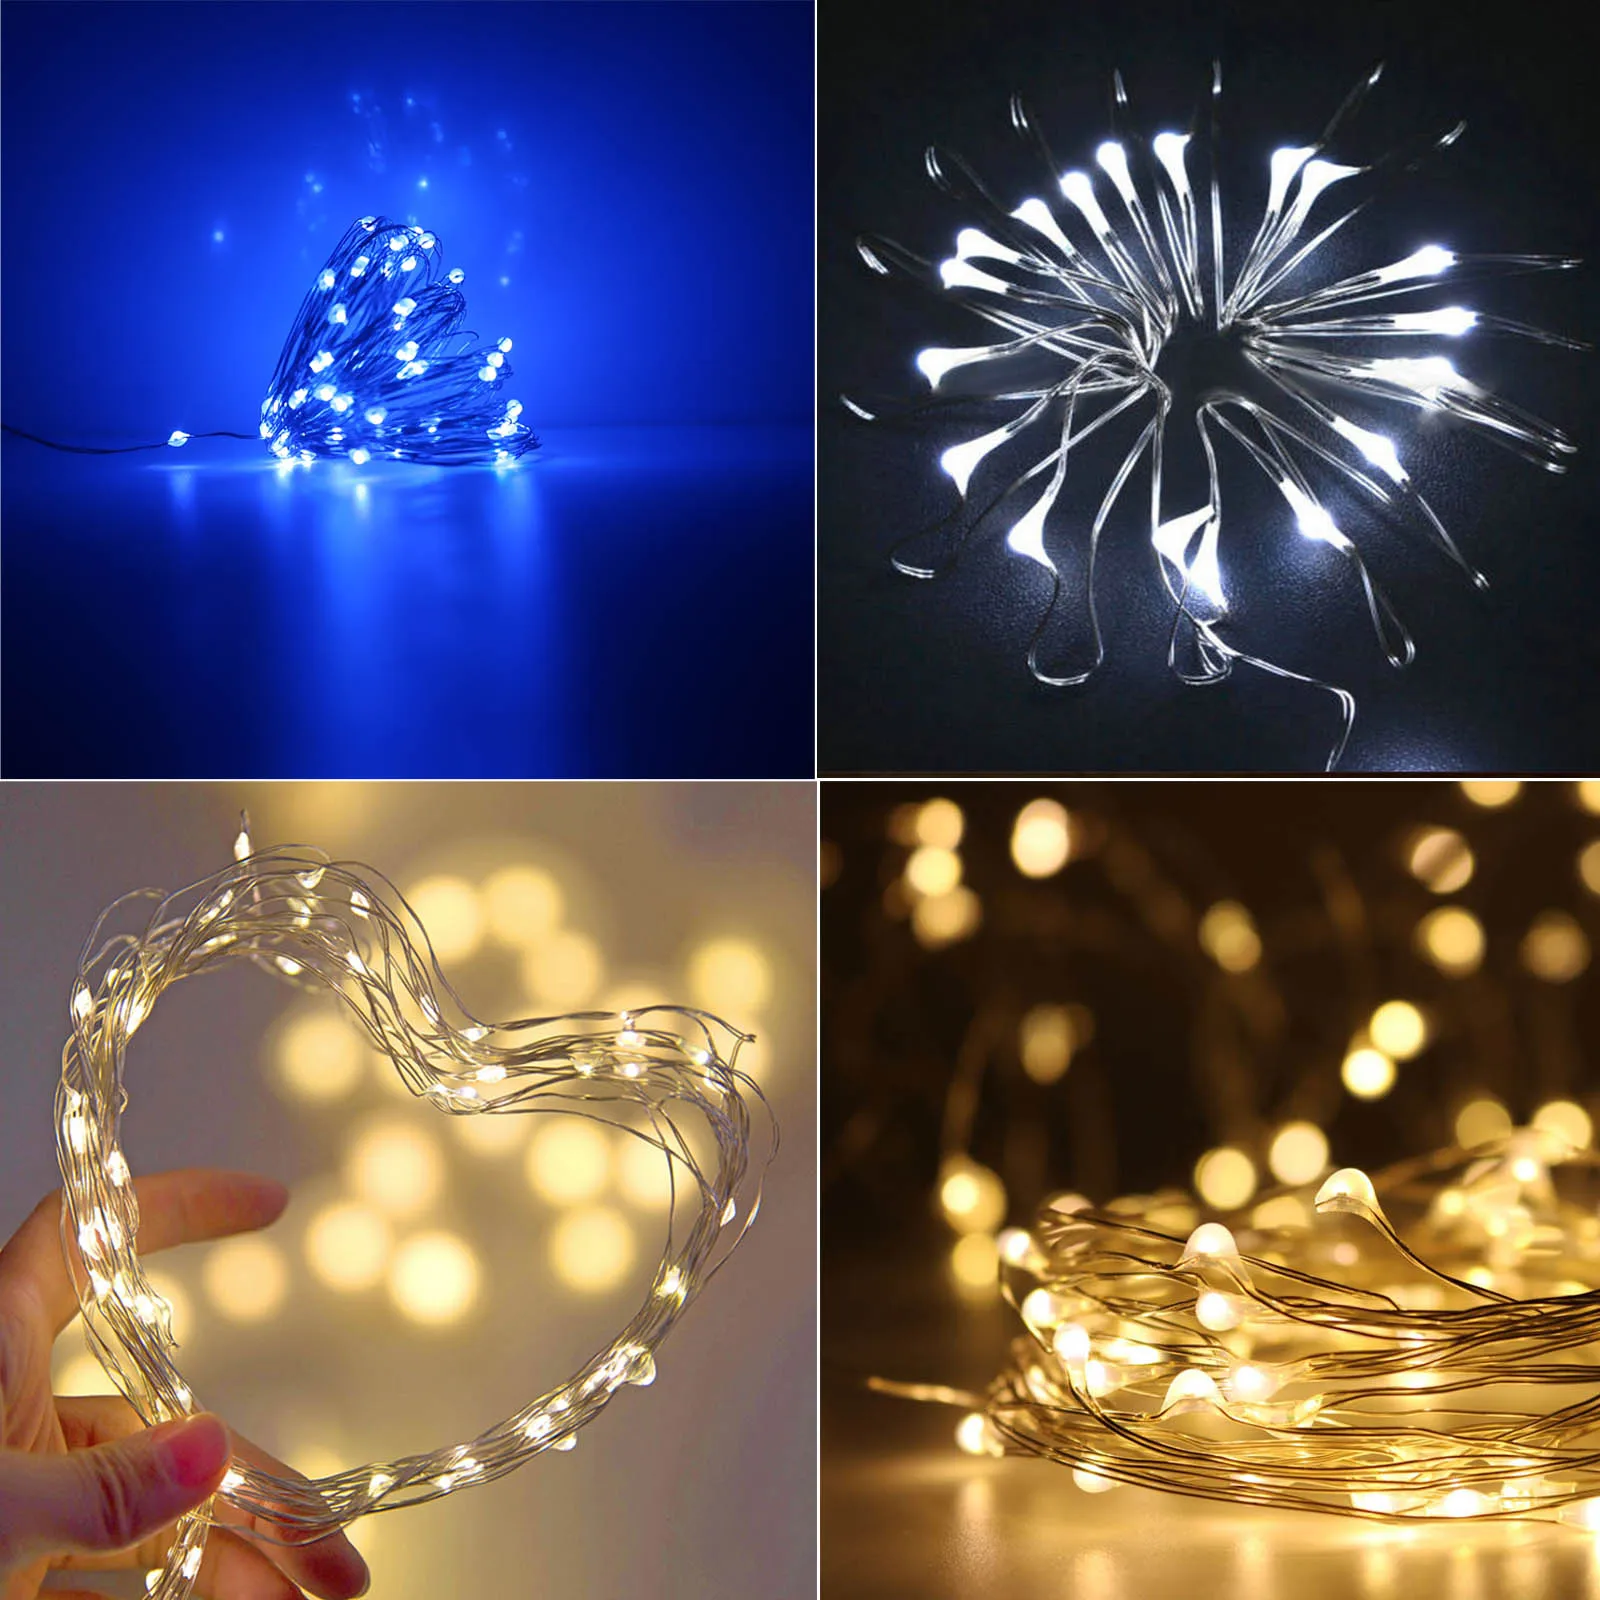 

LED Copper Wire String Fairy Light 10M 5M 3M 2M 1M Garland Home Xmas Wedding Party Decor Powered by Battery USB LR44 CR2032 New